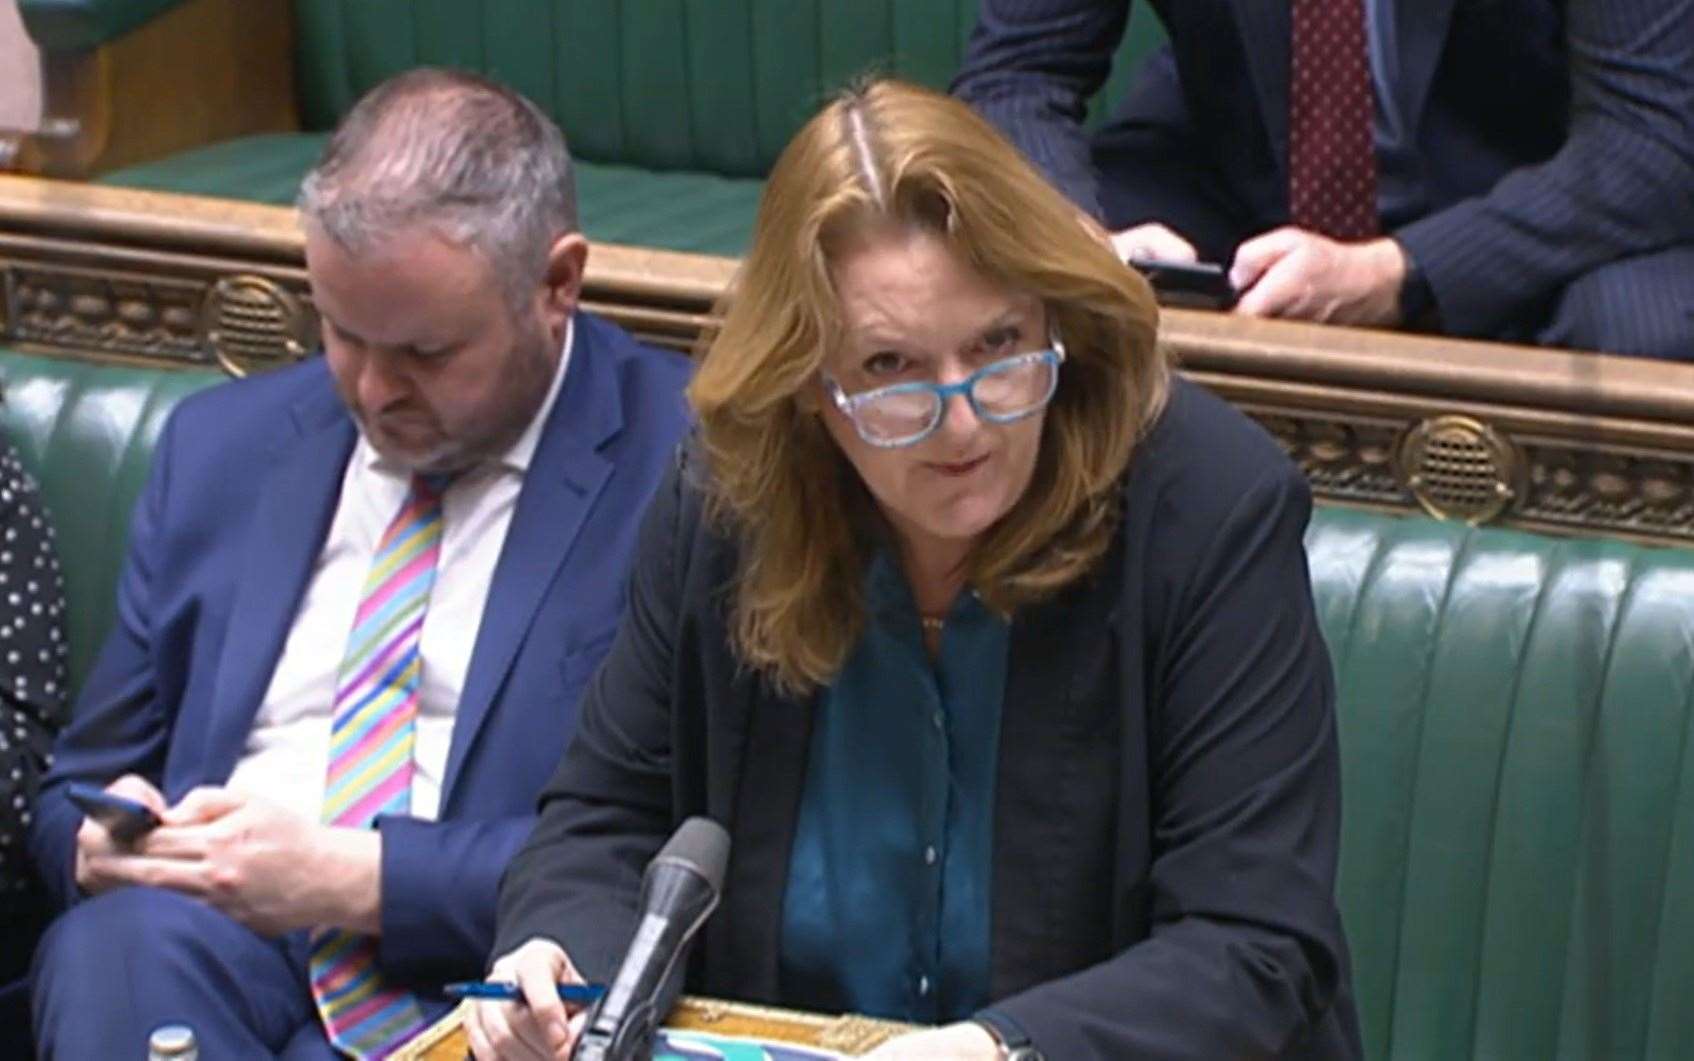 Home Office minister Sarah Dines replies to MPs in the House of Commons (PA)